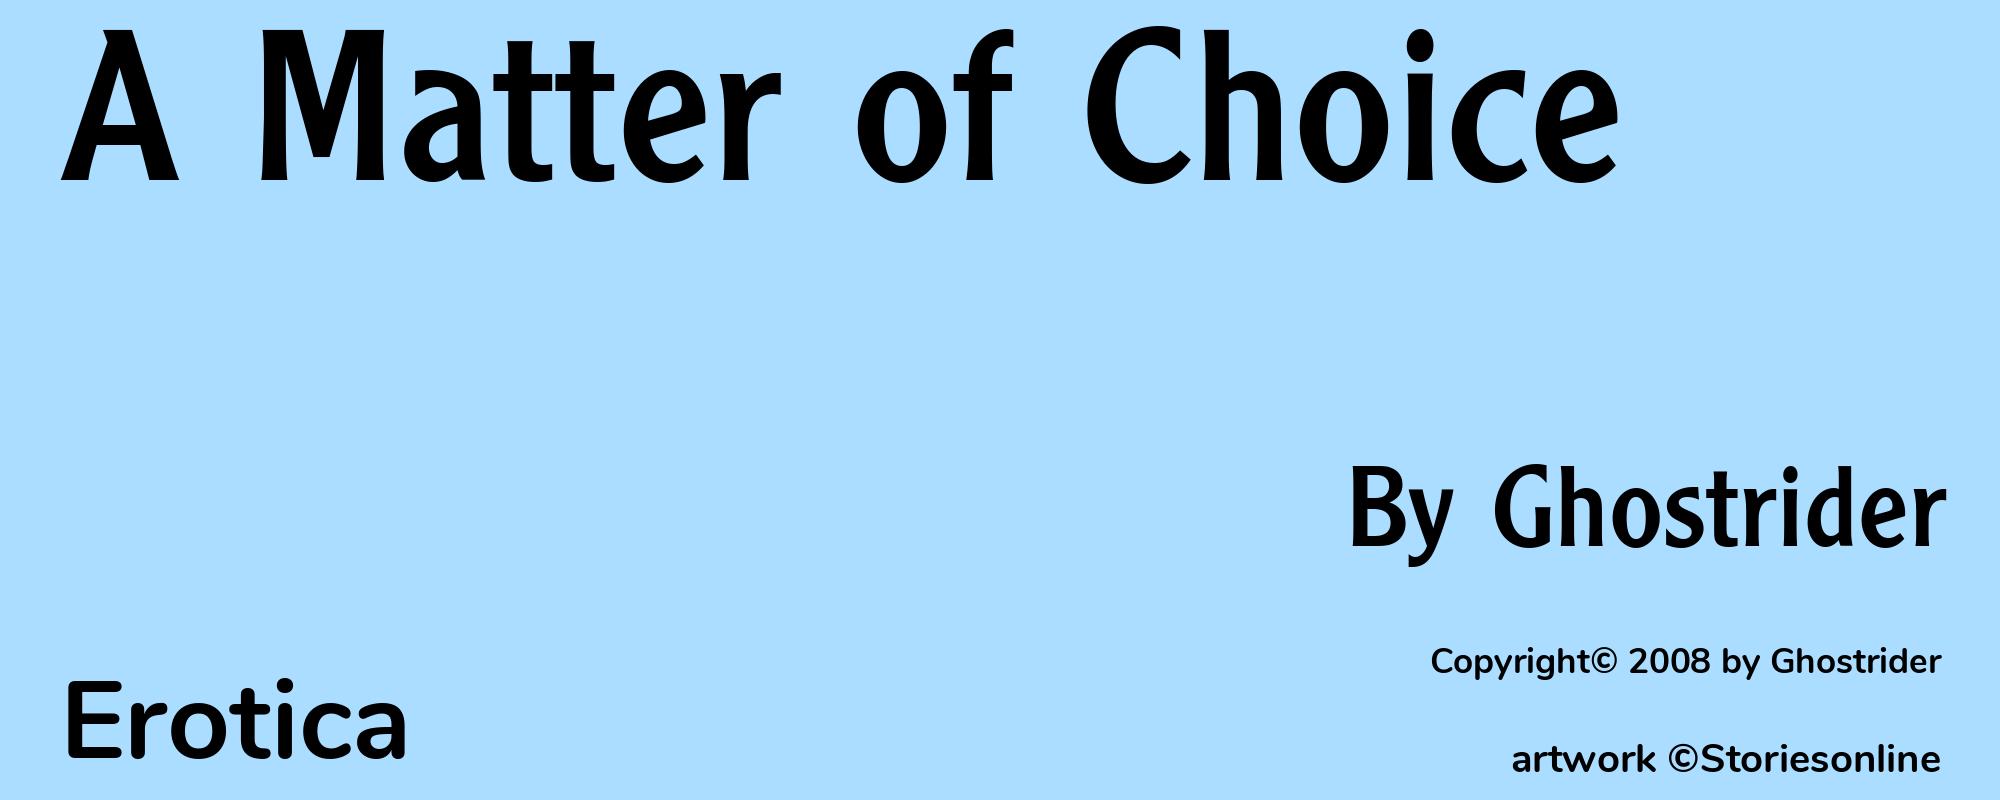 A Matter of Choice - Cover